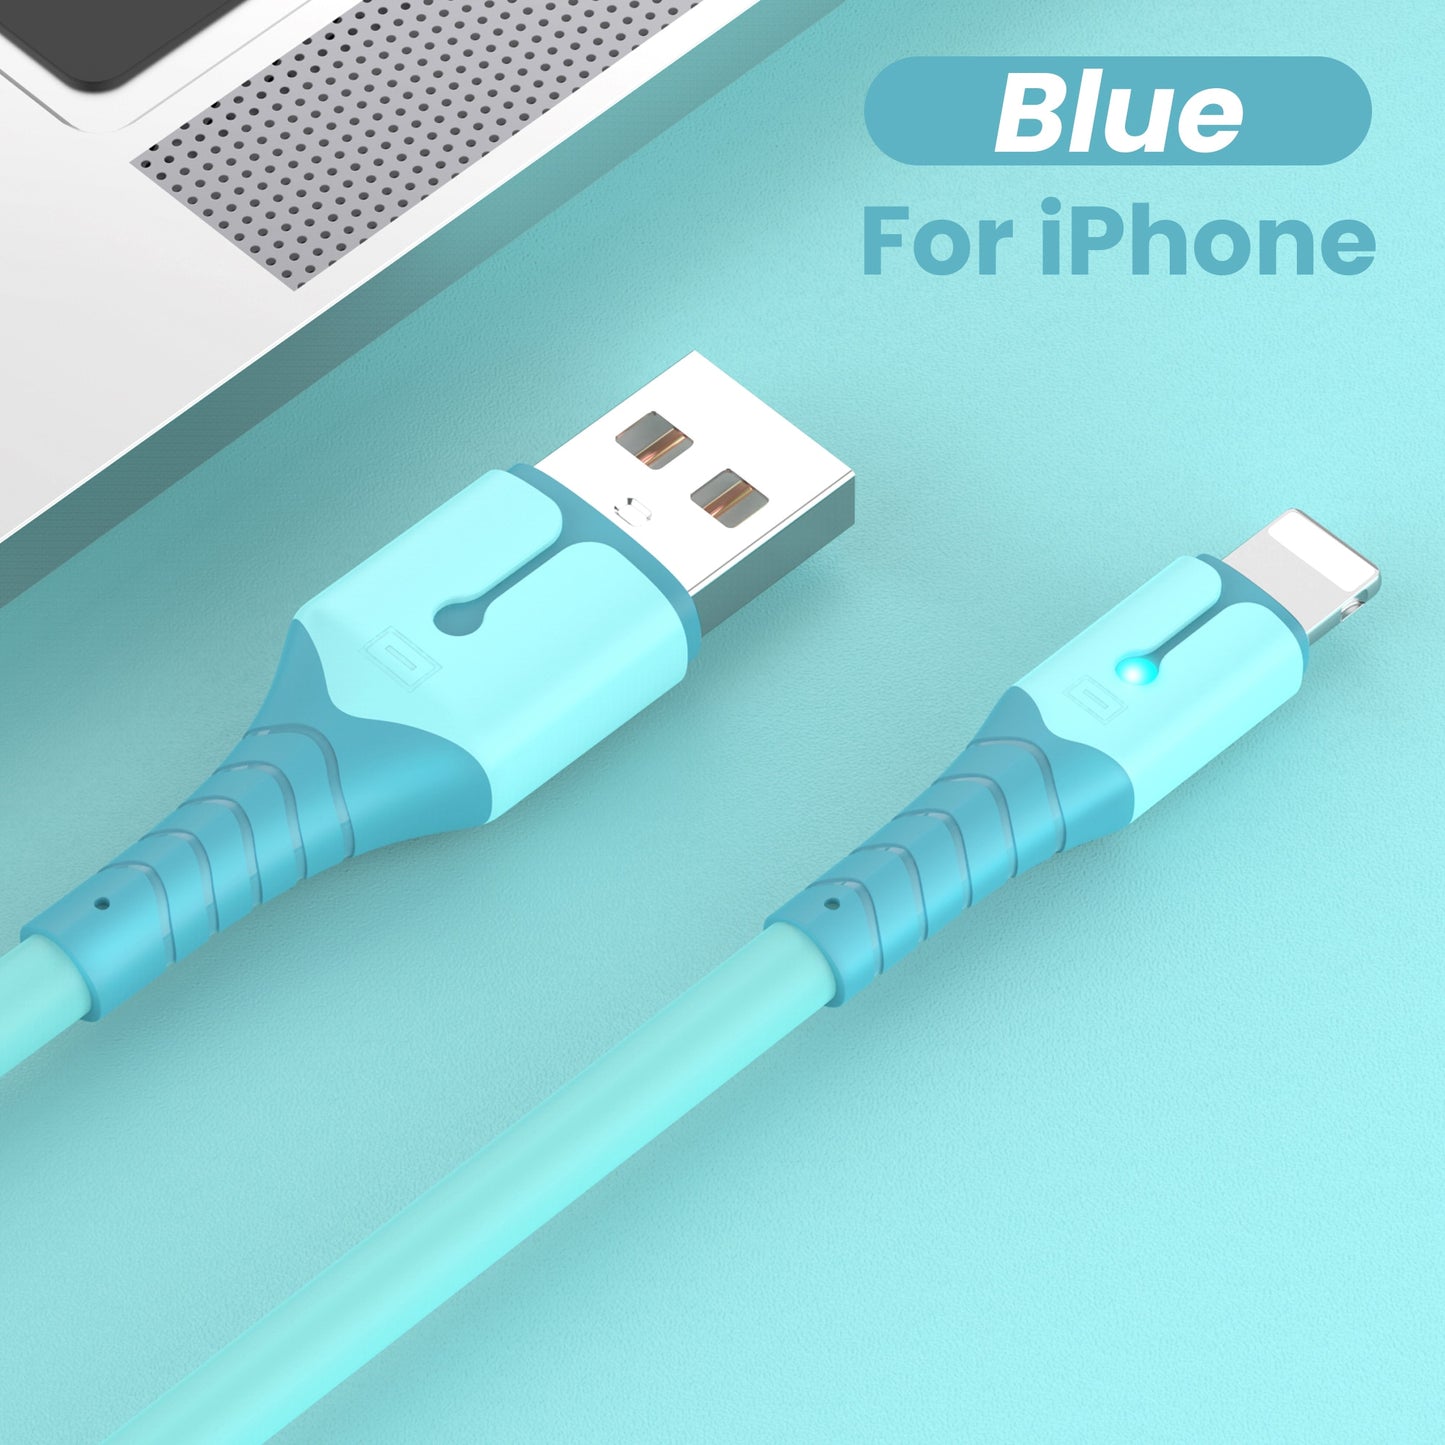 USB Data Cable For iPhone 12 Mini 12 Pro Max X XR 11 XS 8 7 6s Liquid Silicone Charging Cable USB Data Cable Phone Charger Cable